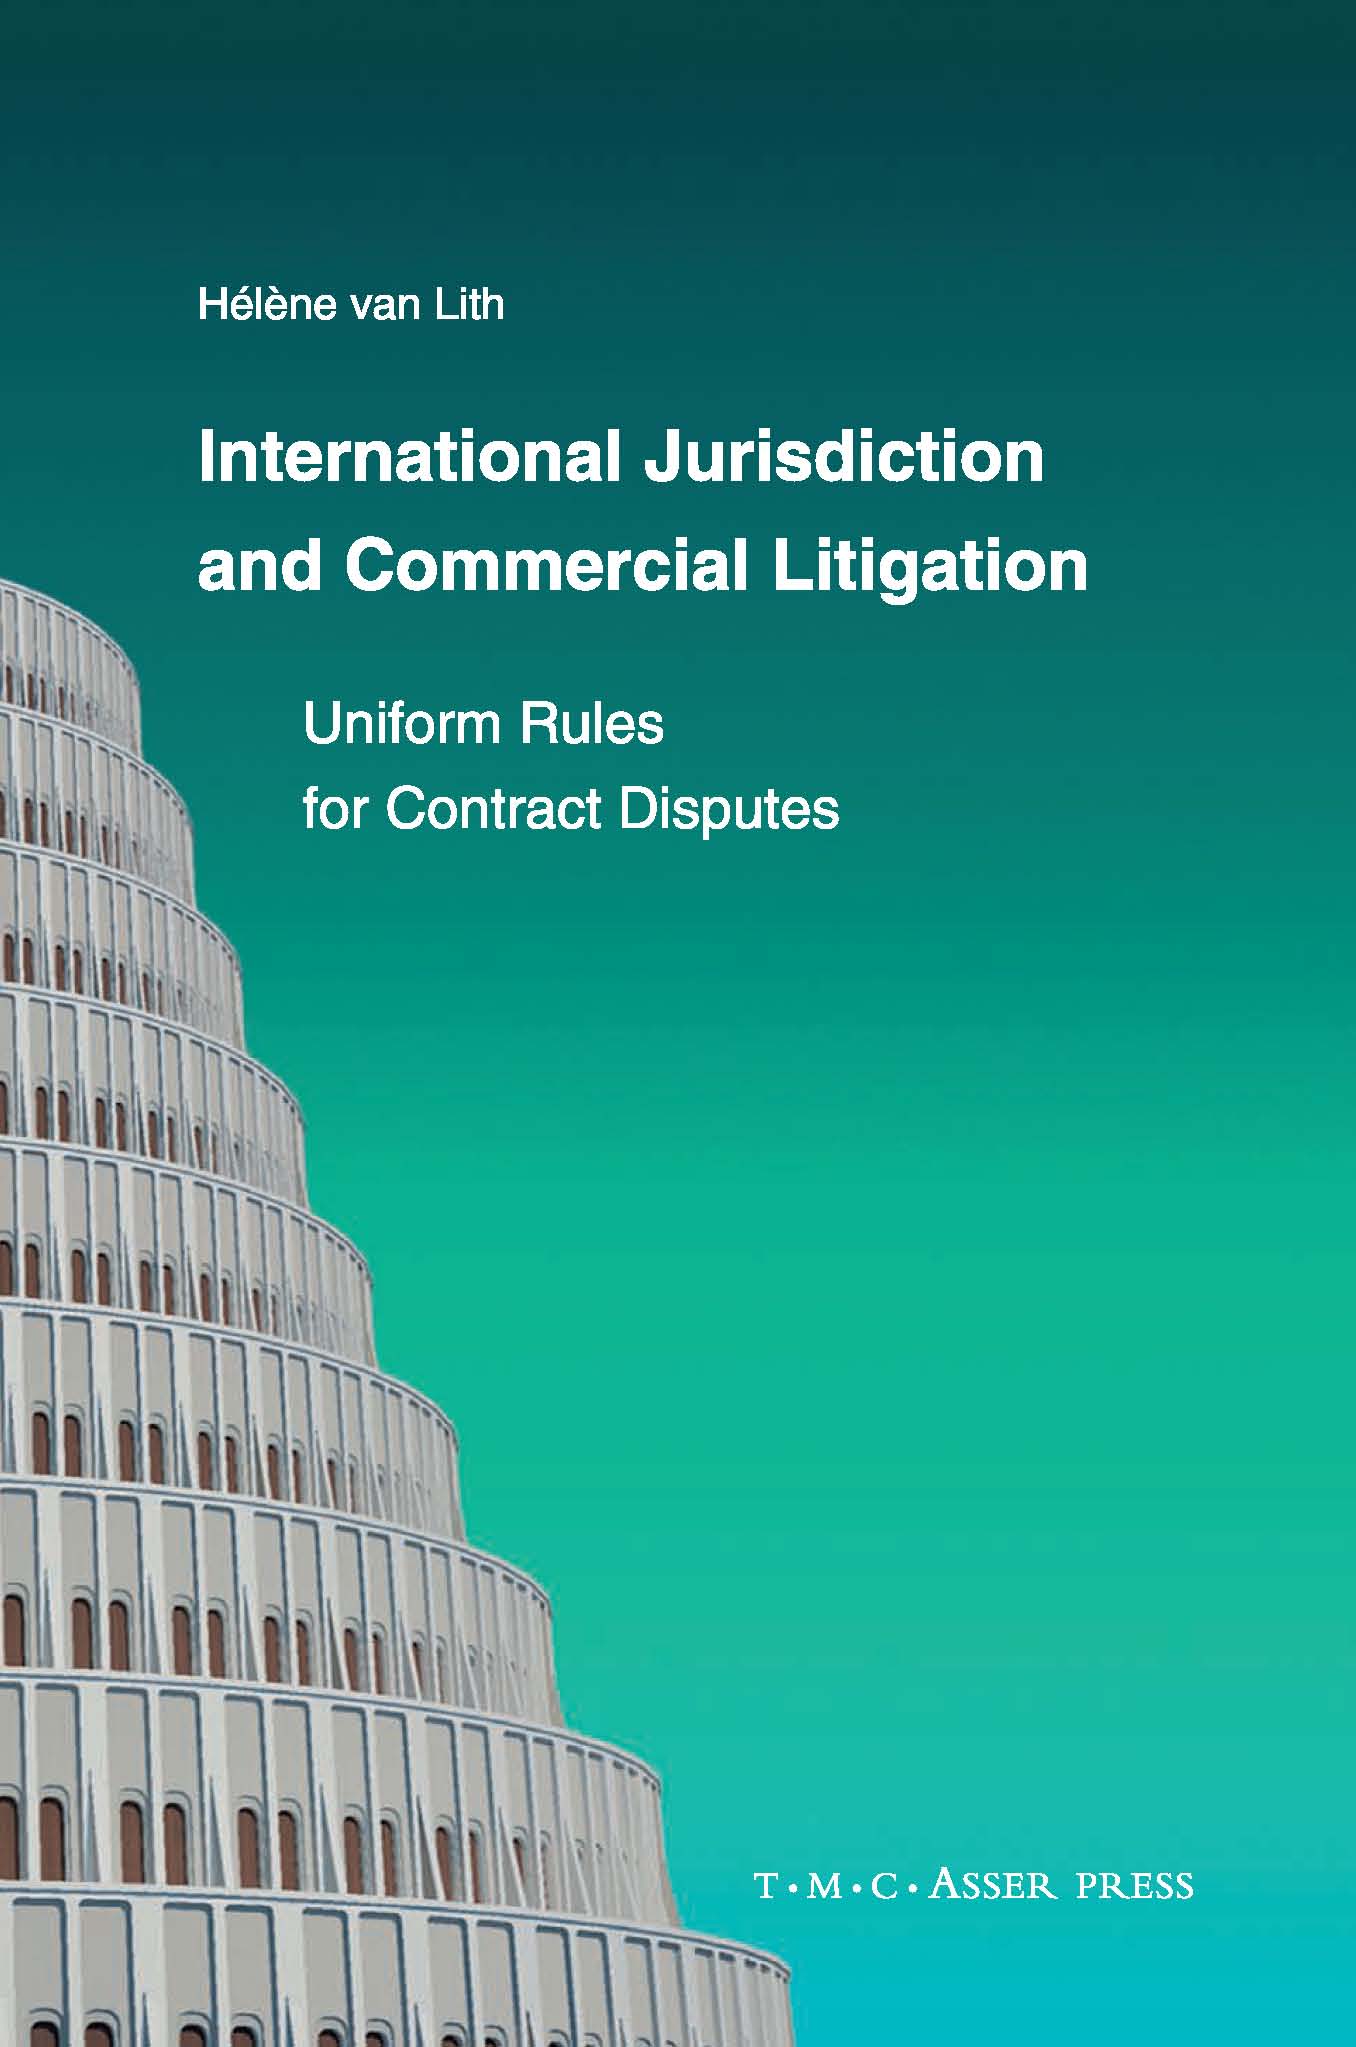 International Jurisdiction and Commercial Litigation - Uniform Rules for Contract Disputes